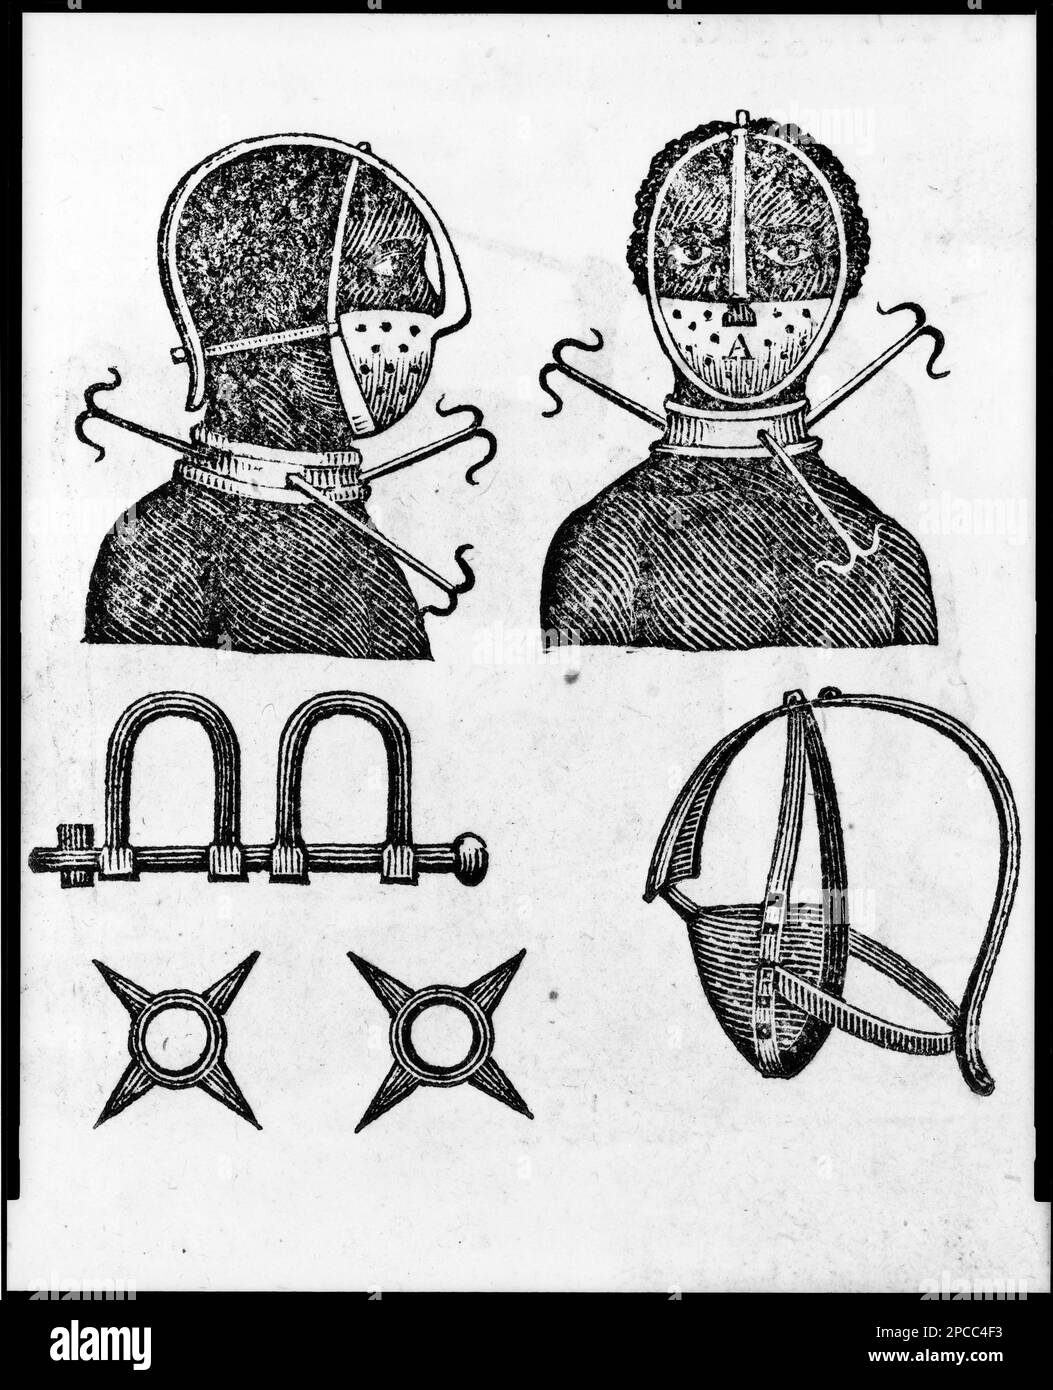 Iron mask, collar, leg shackles and spurs used to restrict slaves.  A woodcut  from 'The Penitential Tyrant' by Thomas Branagan.  New York. 1807. Stock Photo